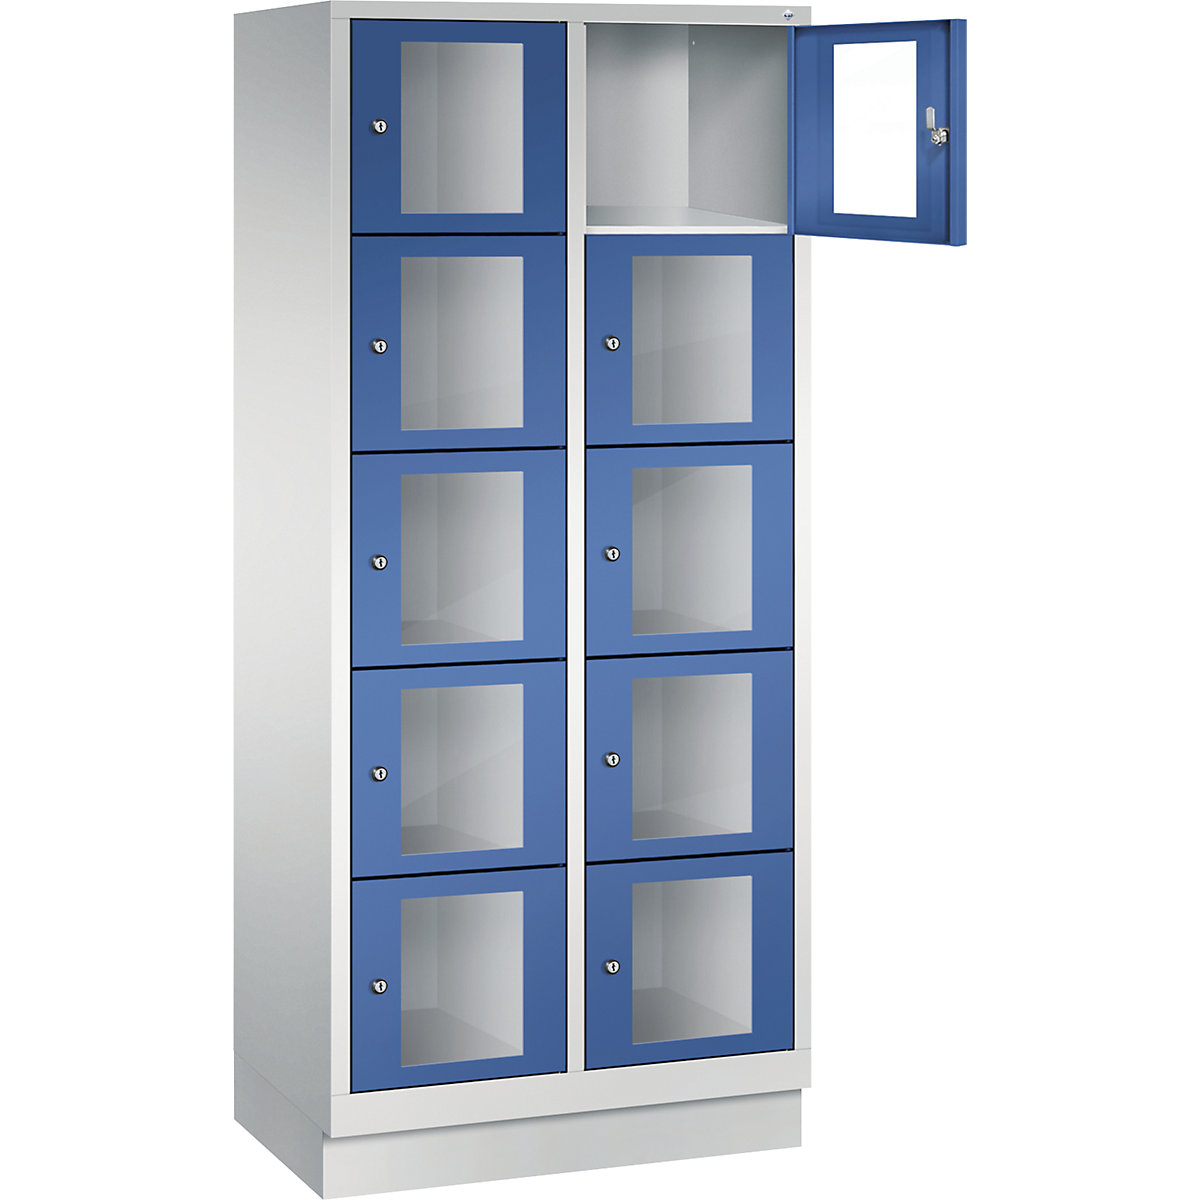 C+P – CLASSIC locker unit, compartment height 295 mm, with plinth, 10 compartments, width 810 mm, gentian blue door